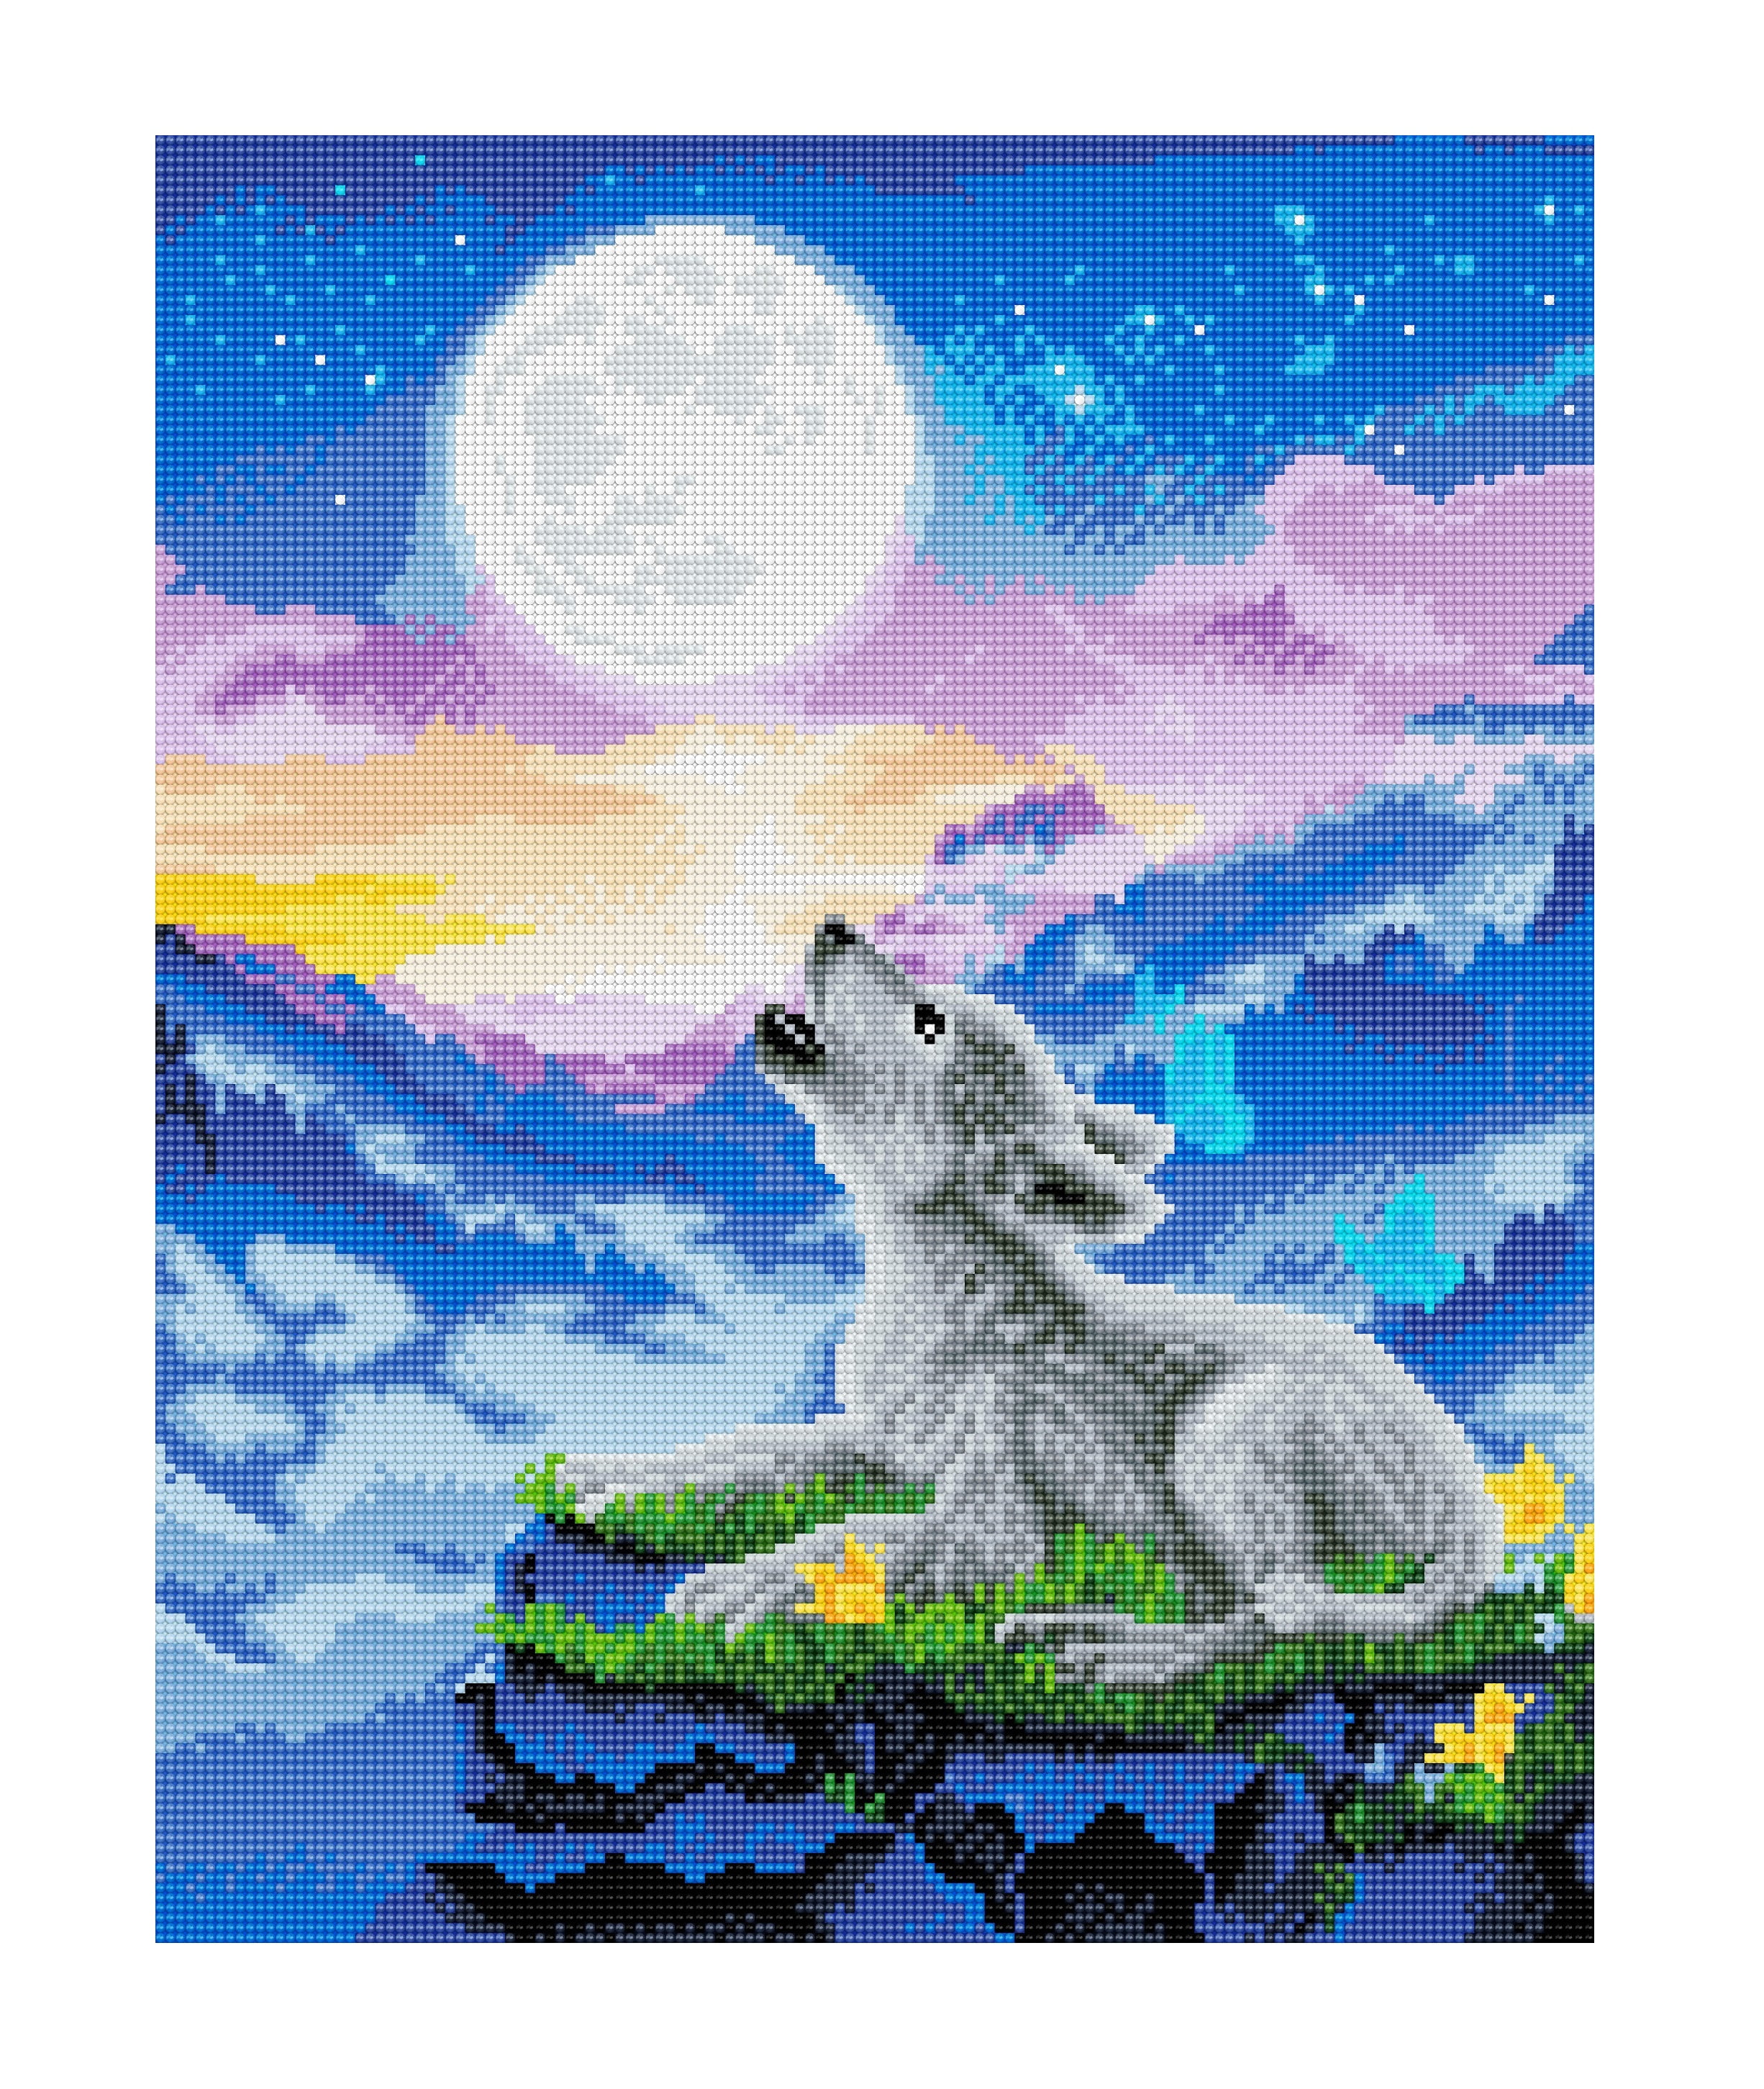 Craft Buddy Crystal Art / Diamond Painting 40cm x 50cm Picture Kit on Wood  Frame - Howling Wolf Club - Full Crystal